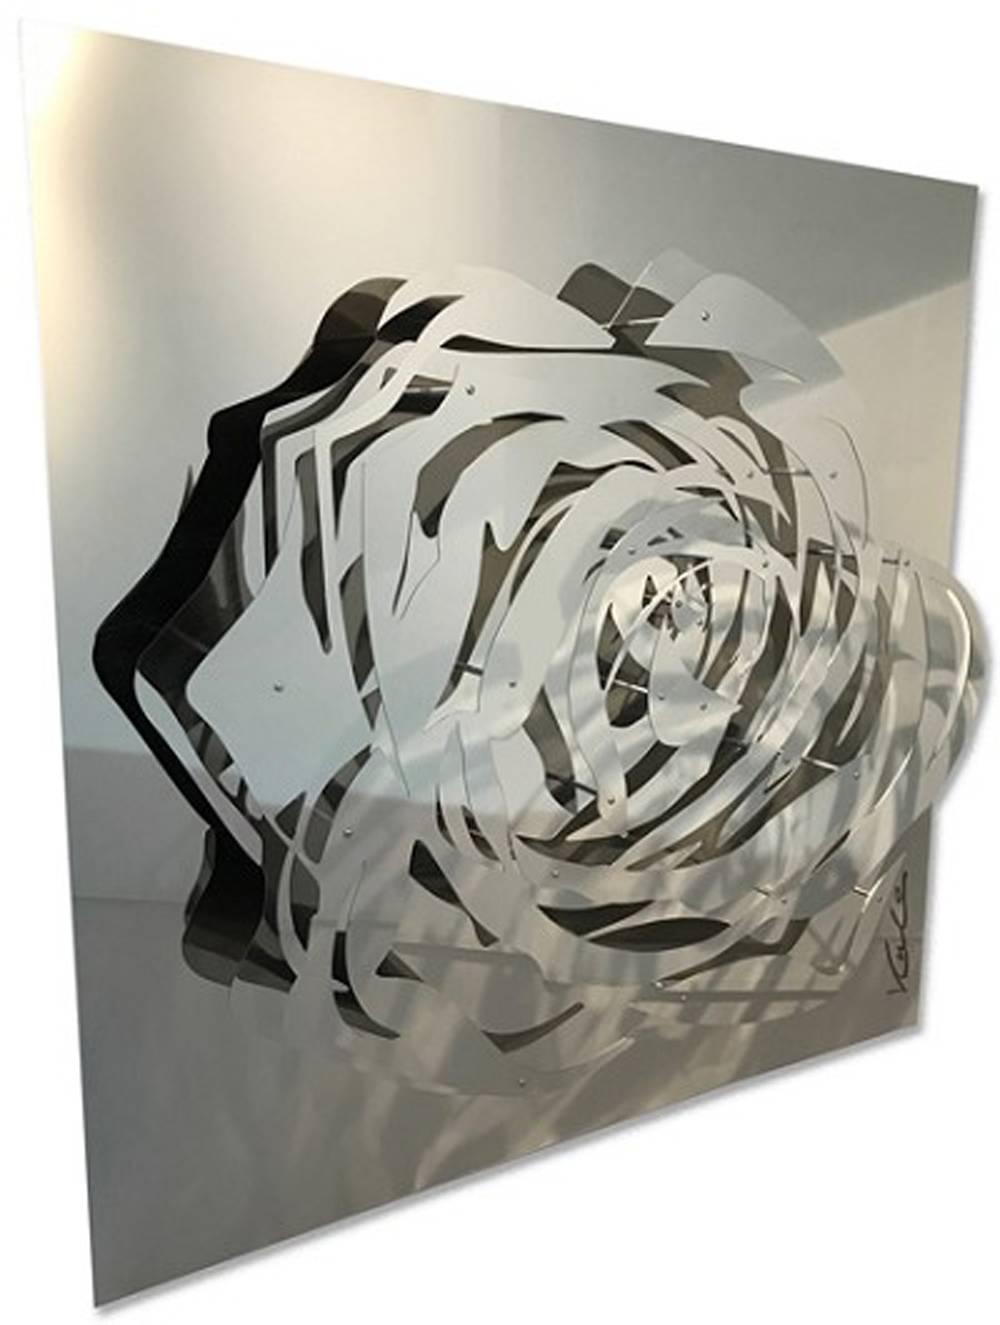 Large Rose - Mirrored Stainless - Sculpture by Michael Kalish